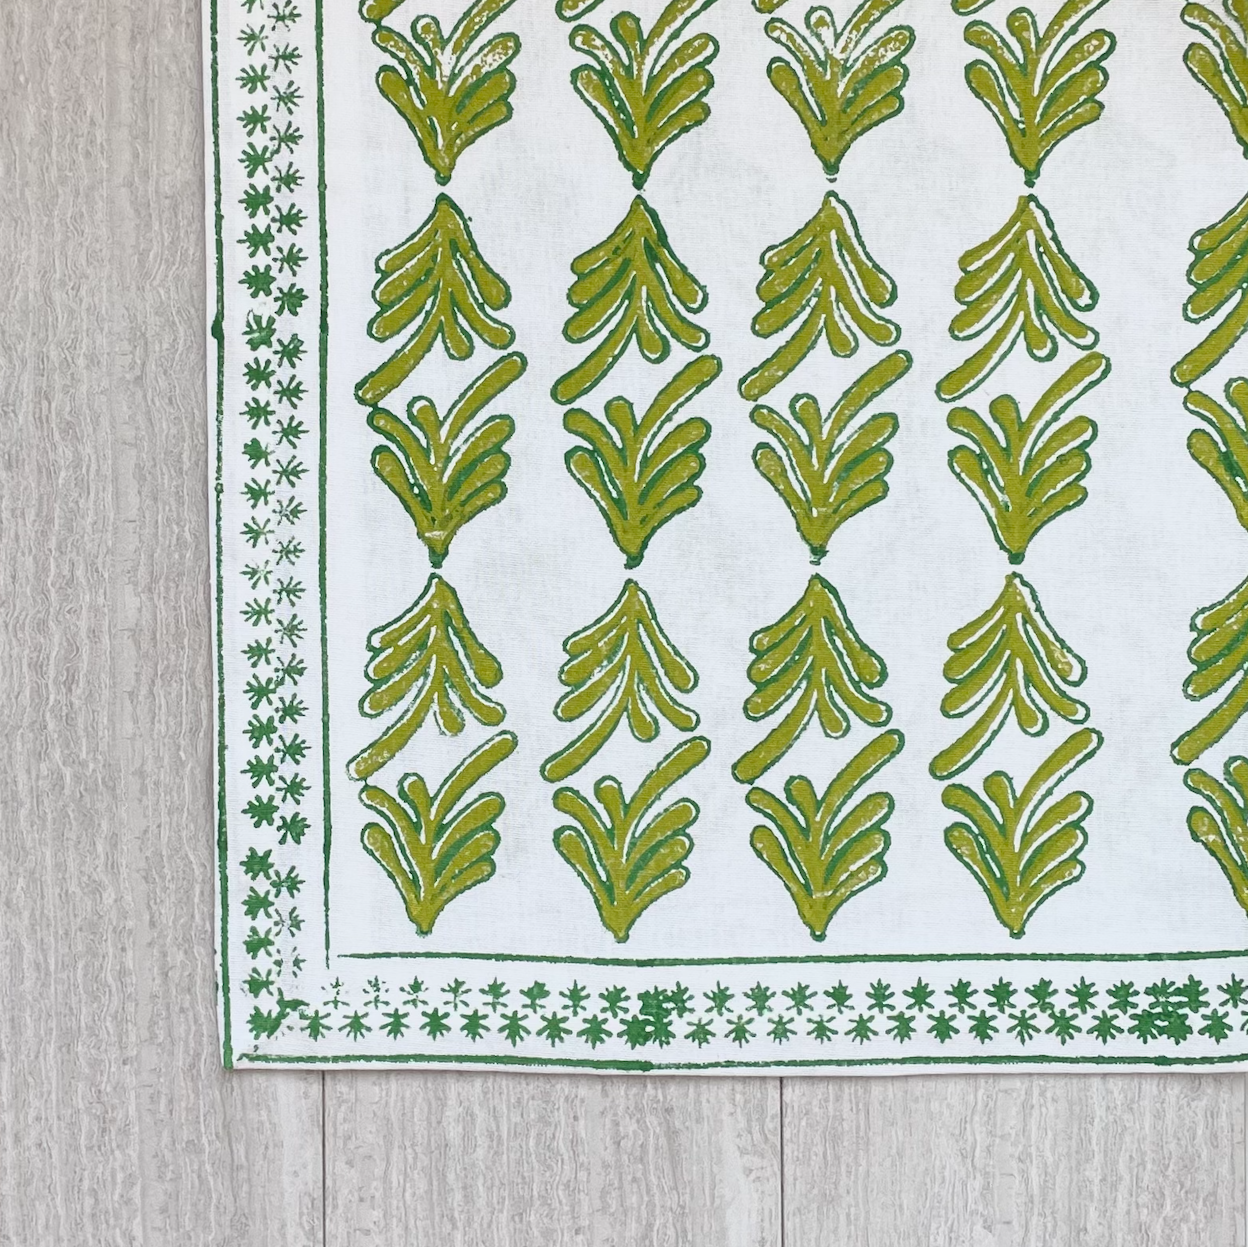 Table Runners - Palmetto, Cactus & Kelly Green